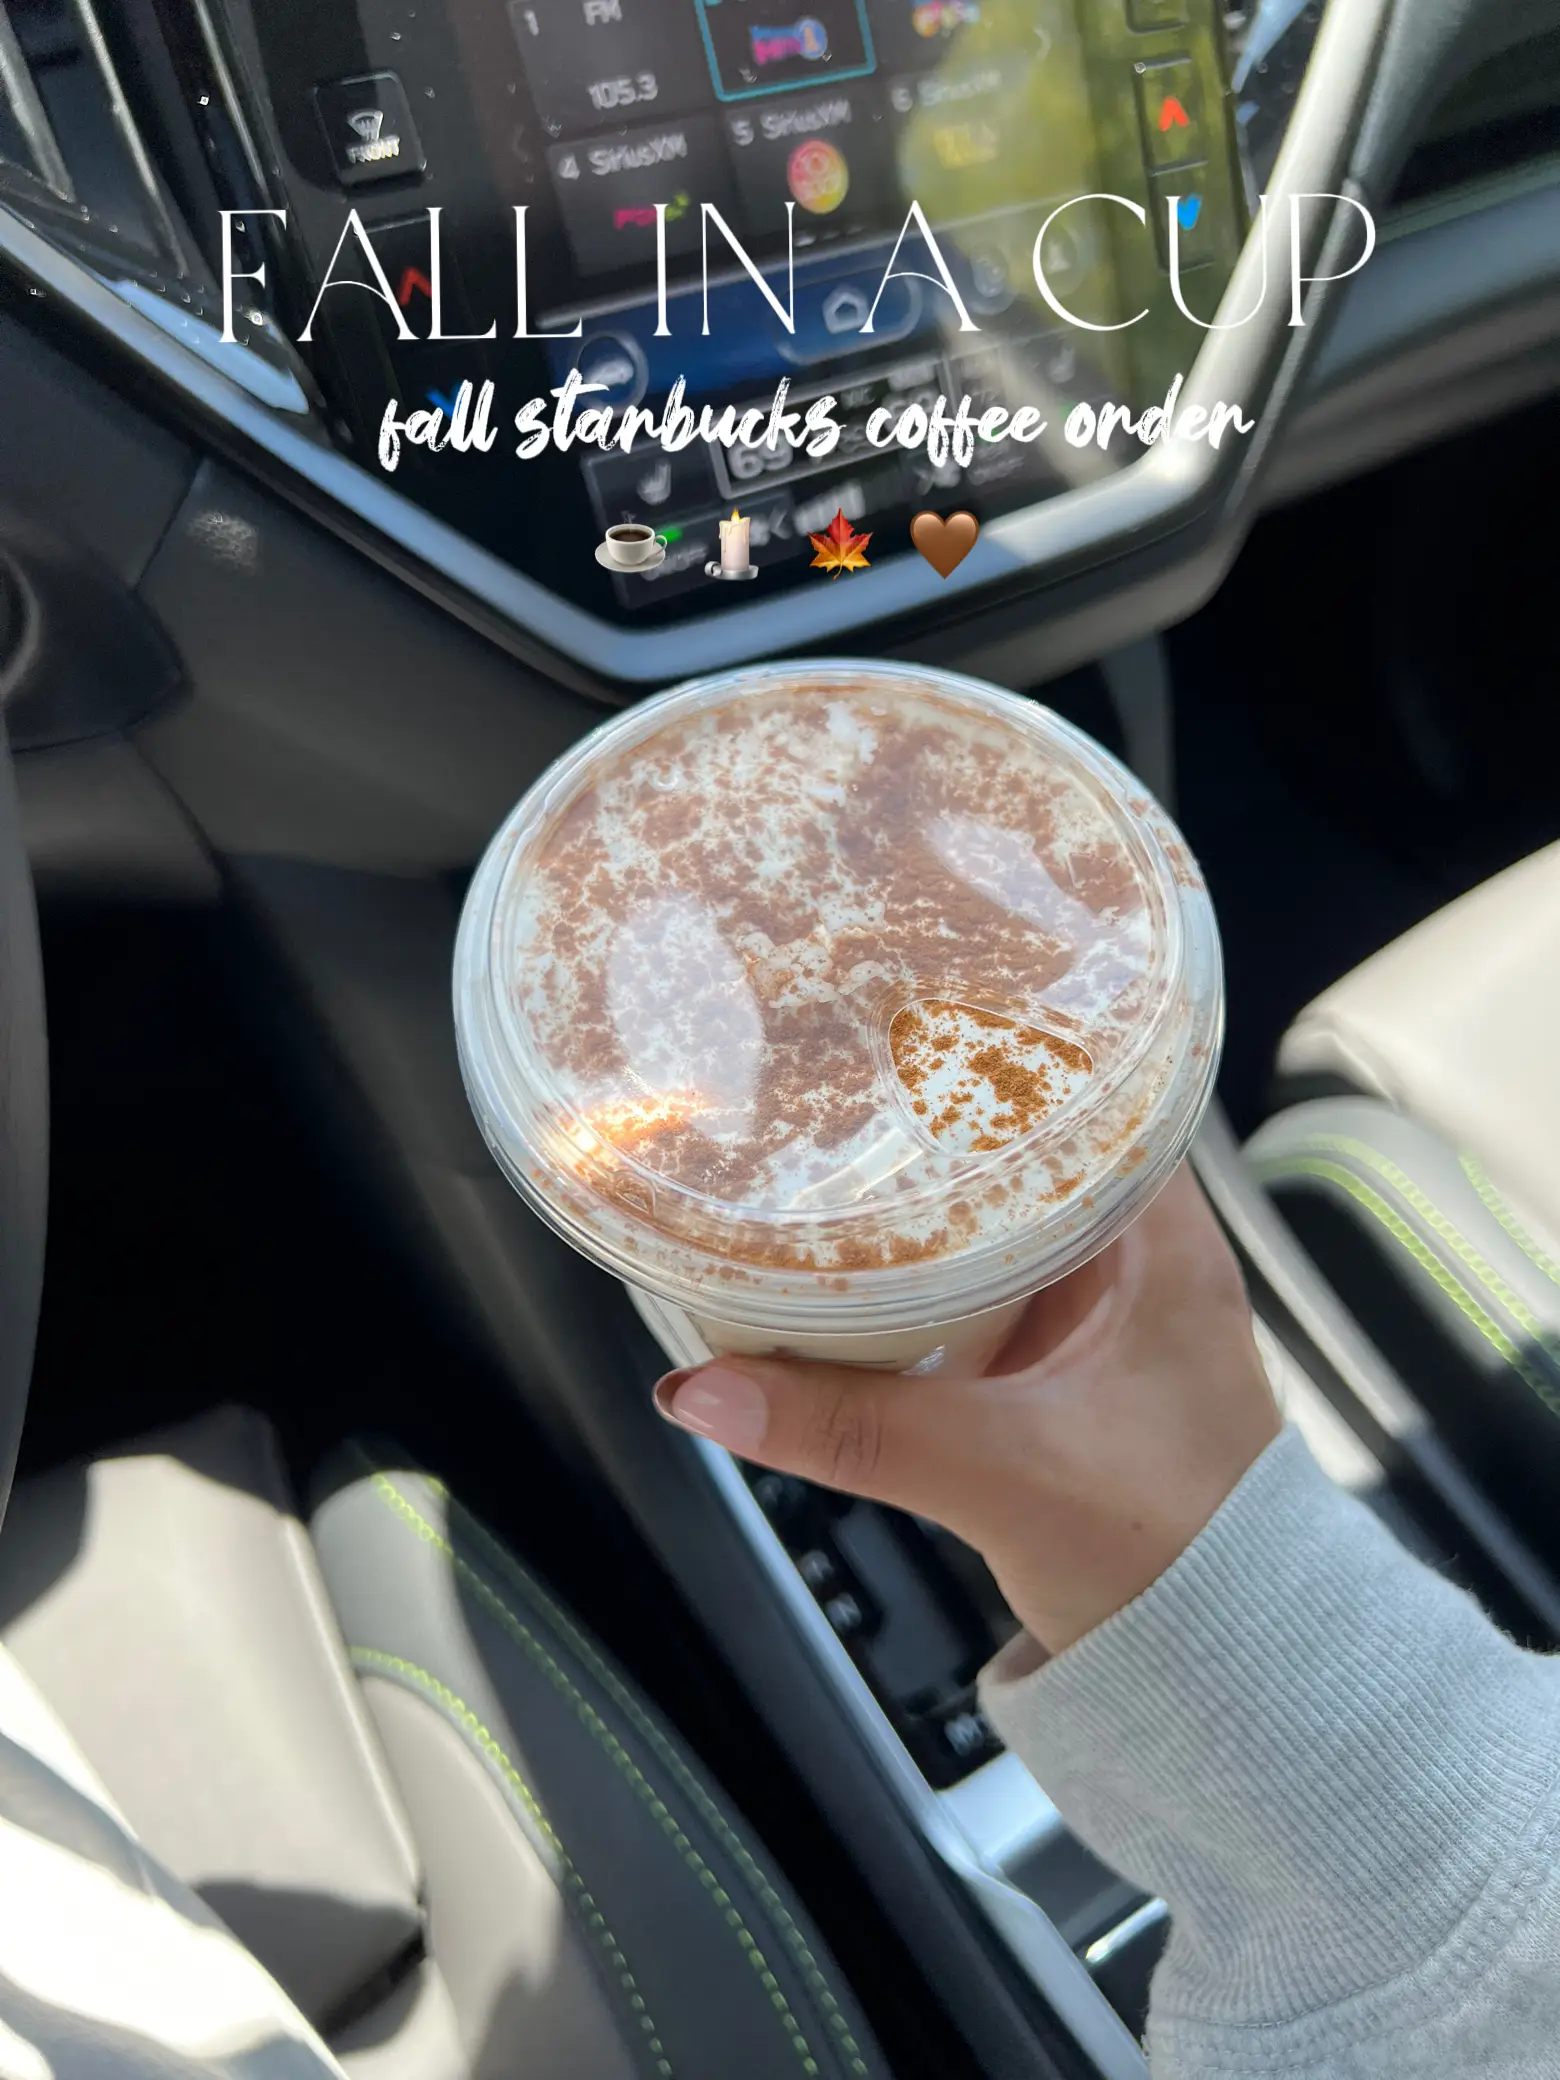 Fall Starbucks Coffee Order's images